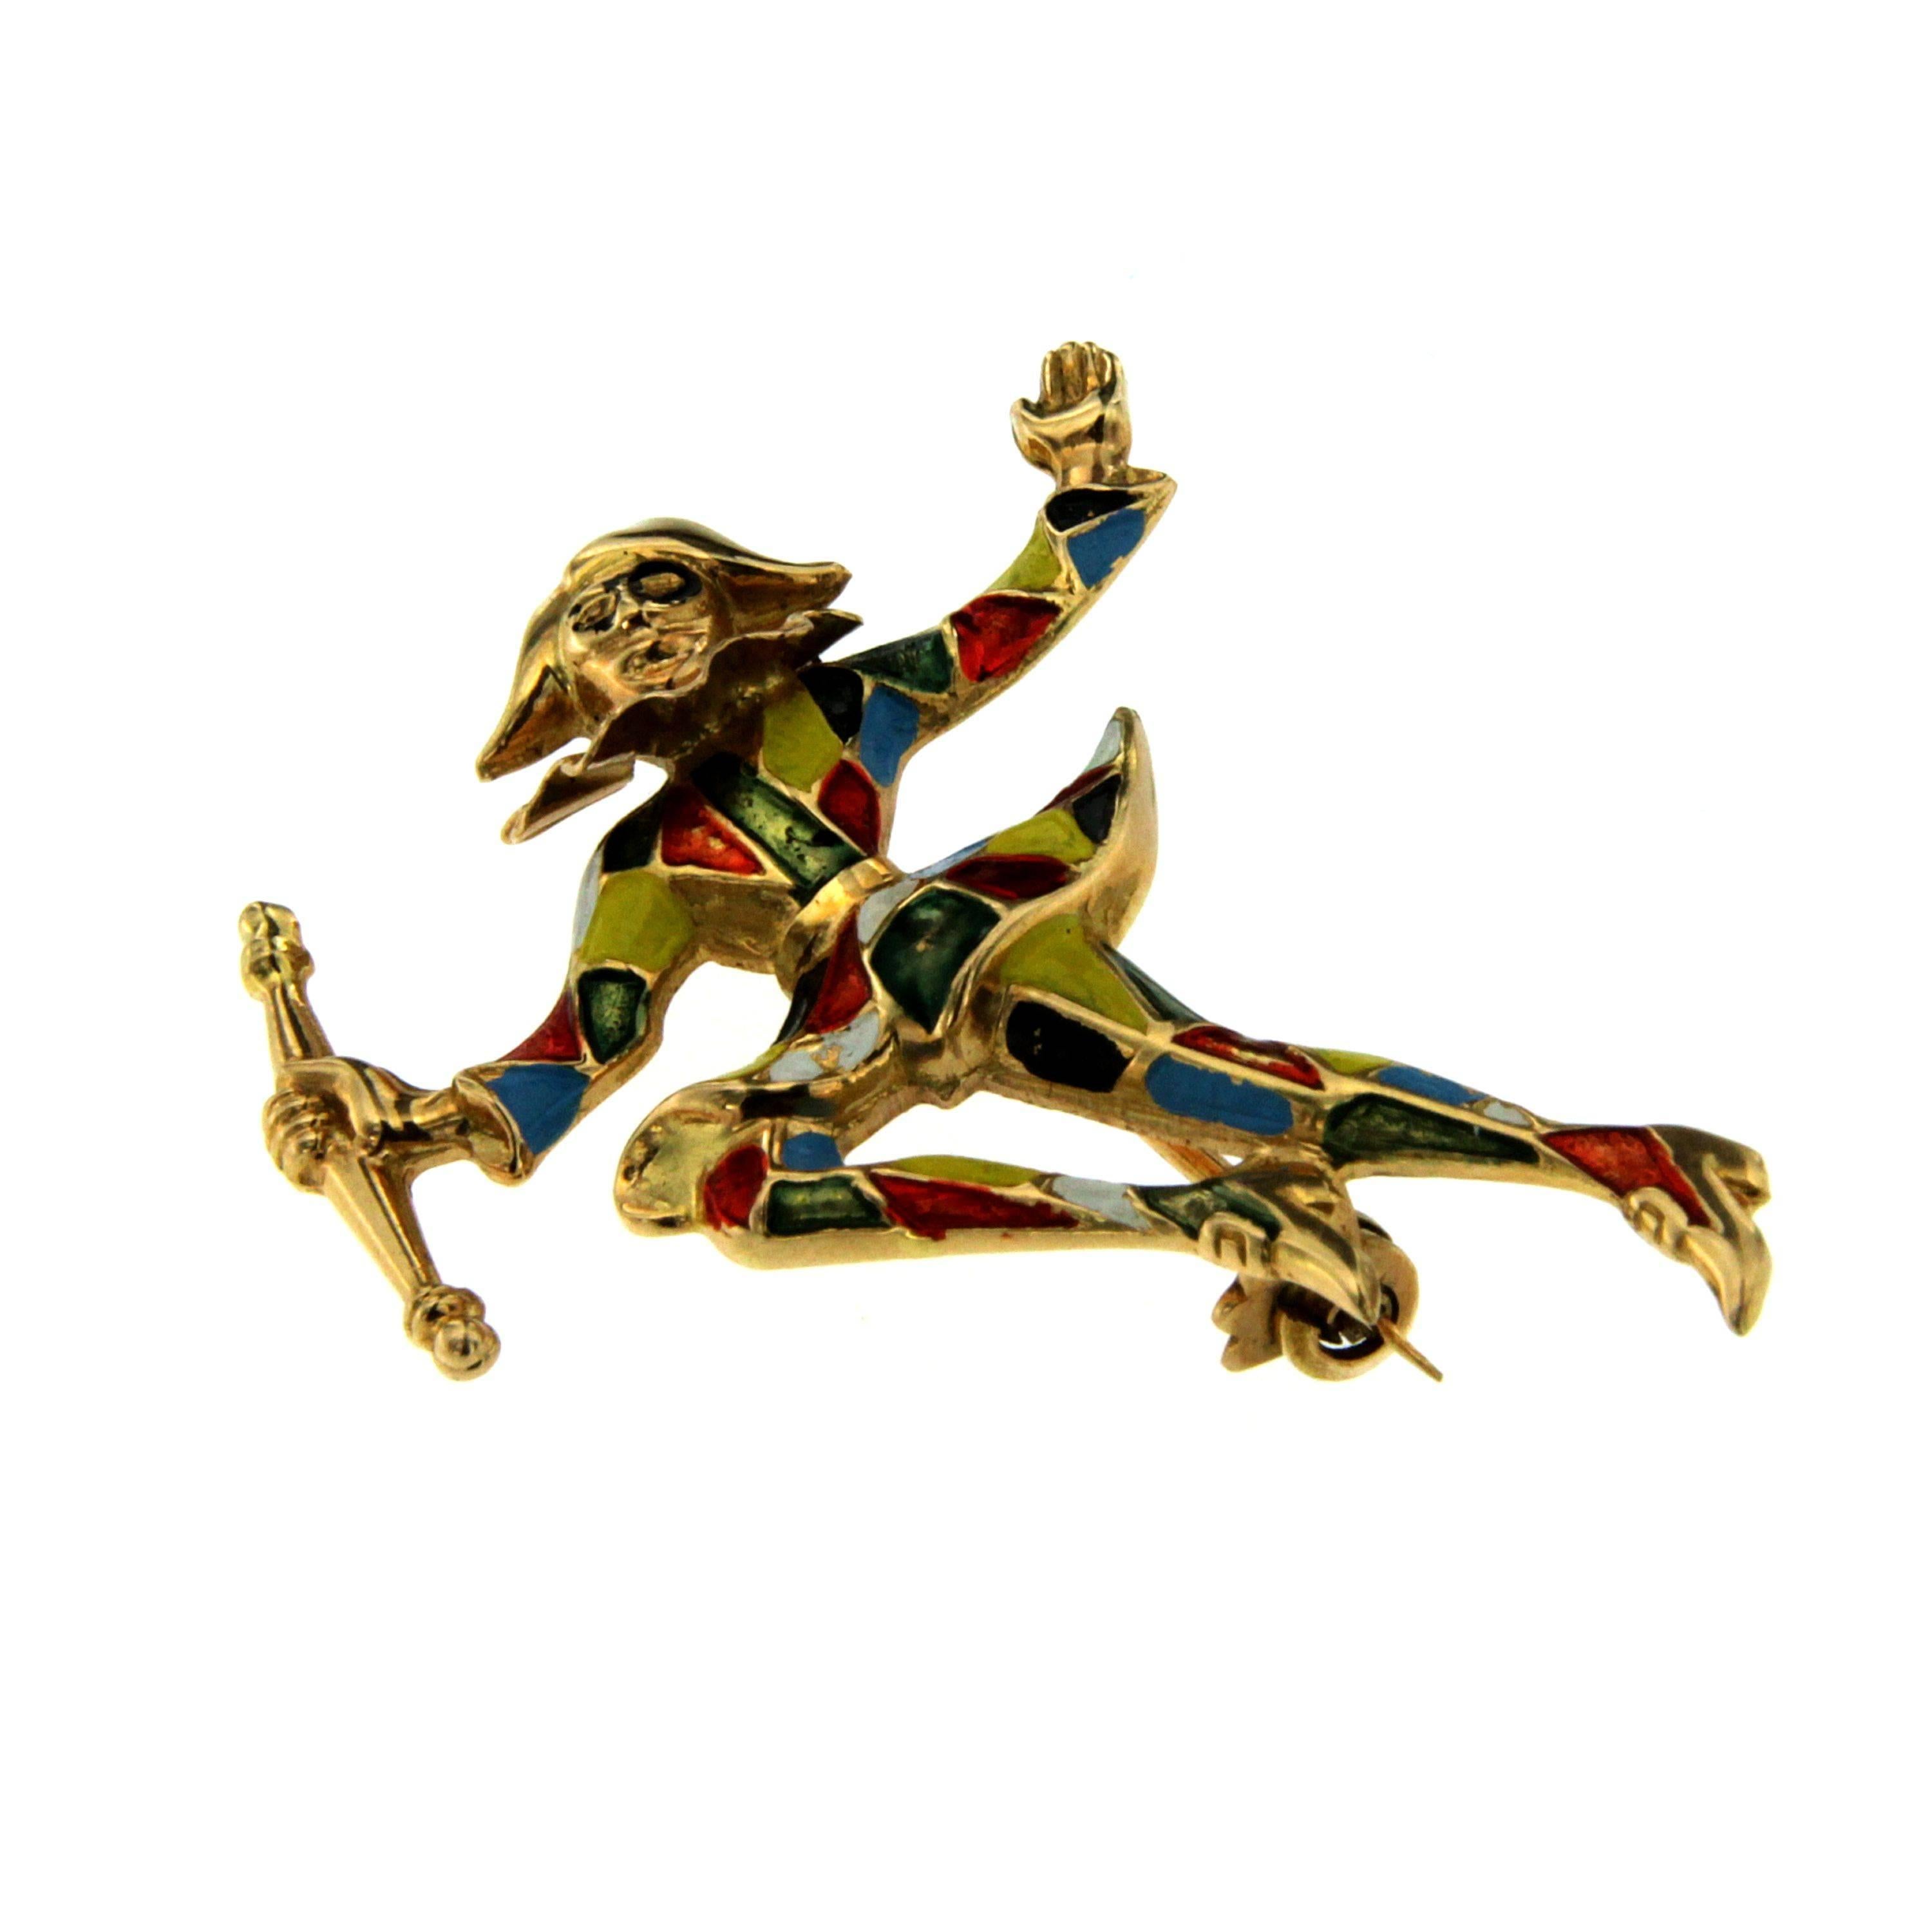 Harlequin brooch in costume enameled on 18K yellow gold. 
The brooch is stamped with creator marker's mark (62 VI) and a hallmark for 18 karat gold.
This piece is designed and crafted entirely by hand in the traditional way, using age old techniques